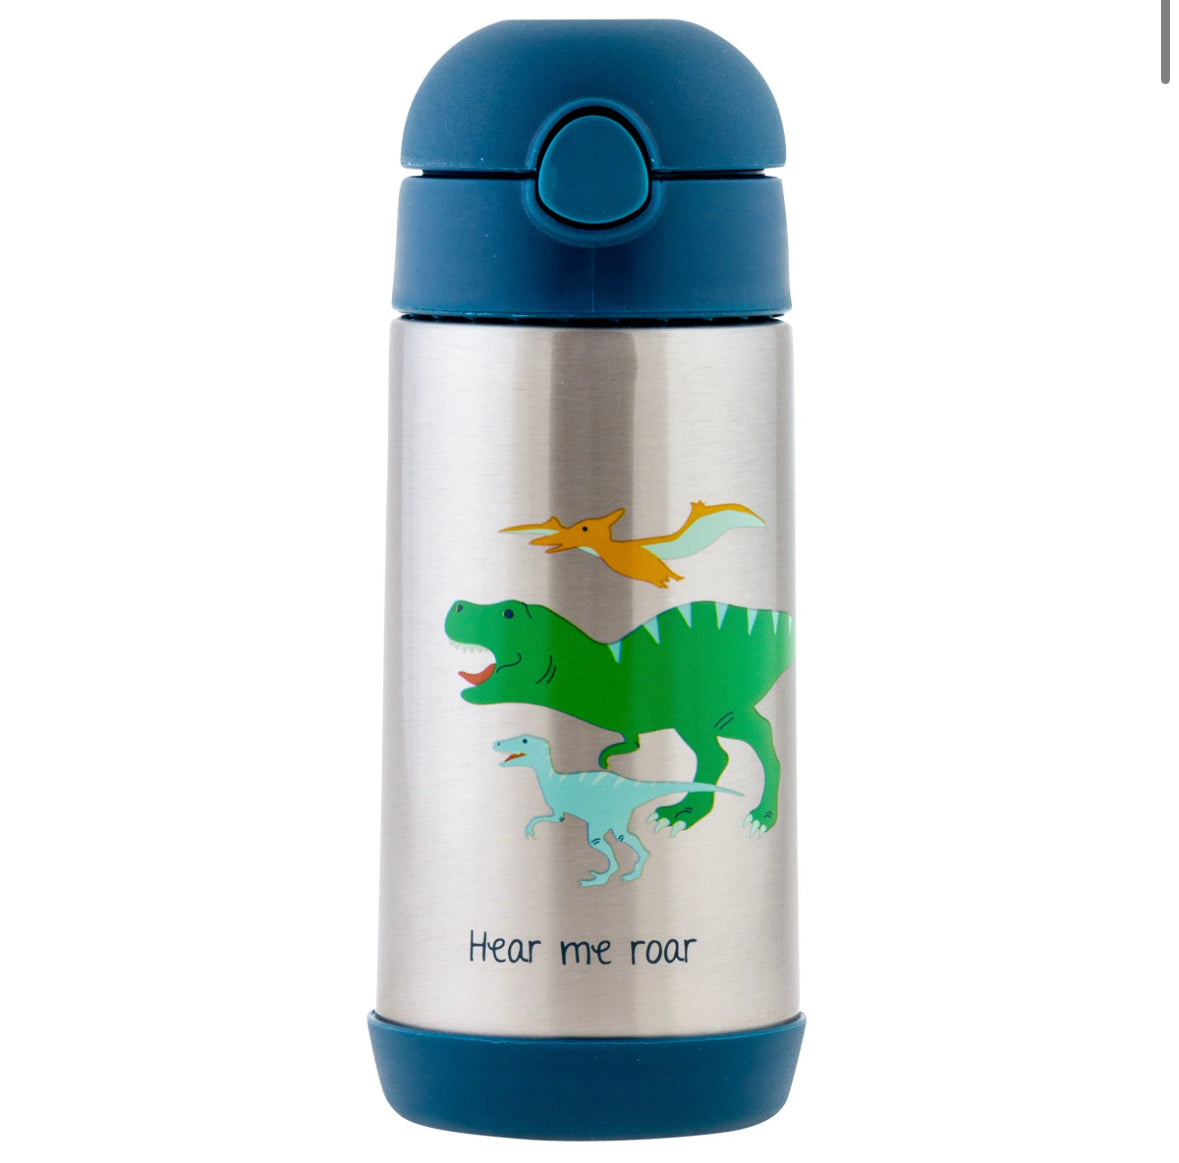 A Double Wall Stainless Steel Bottle - Green Dinosaur from the Stephen Joseph Back-to-School Collection.